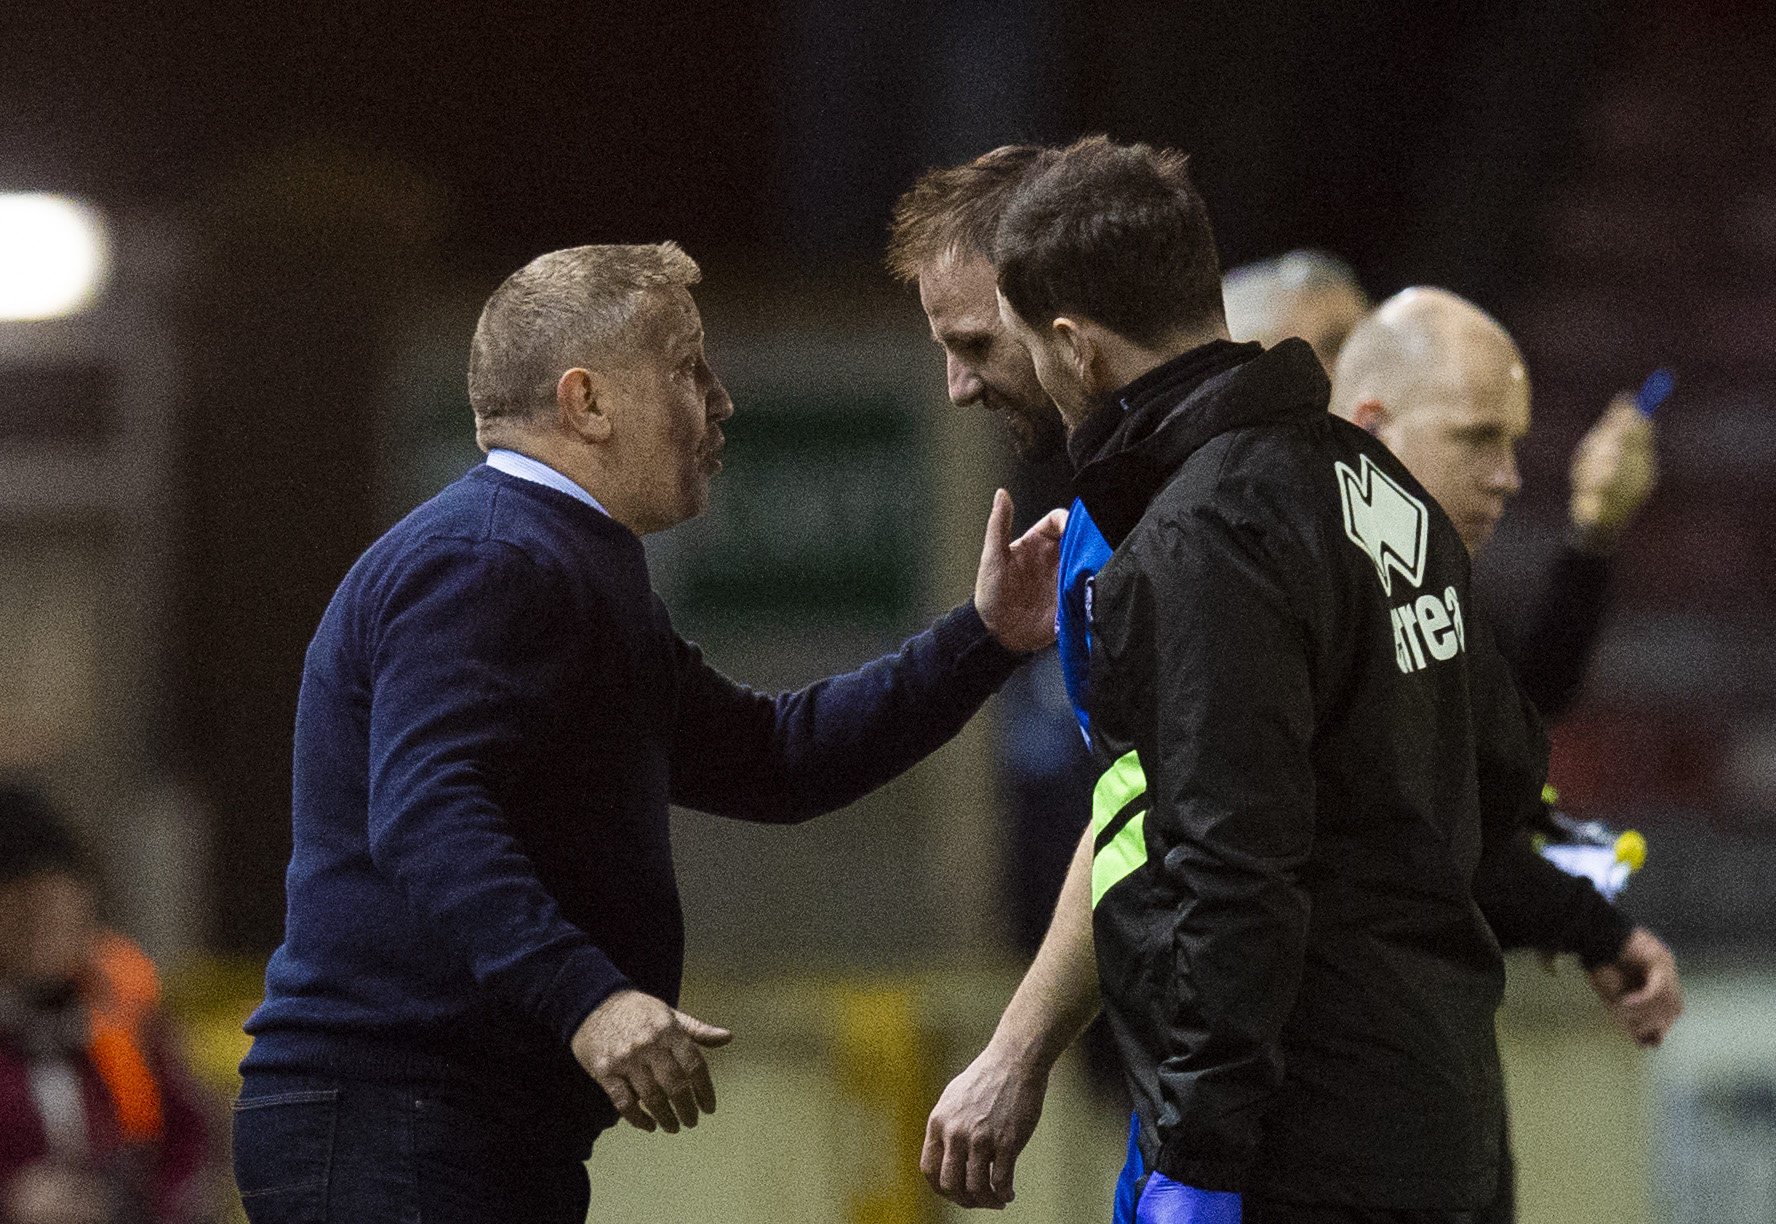 Inverness CT manager John Robertson (L) speaks with Sean Welsh as he leaves the field with an injury